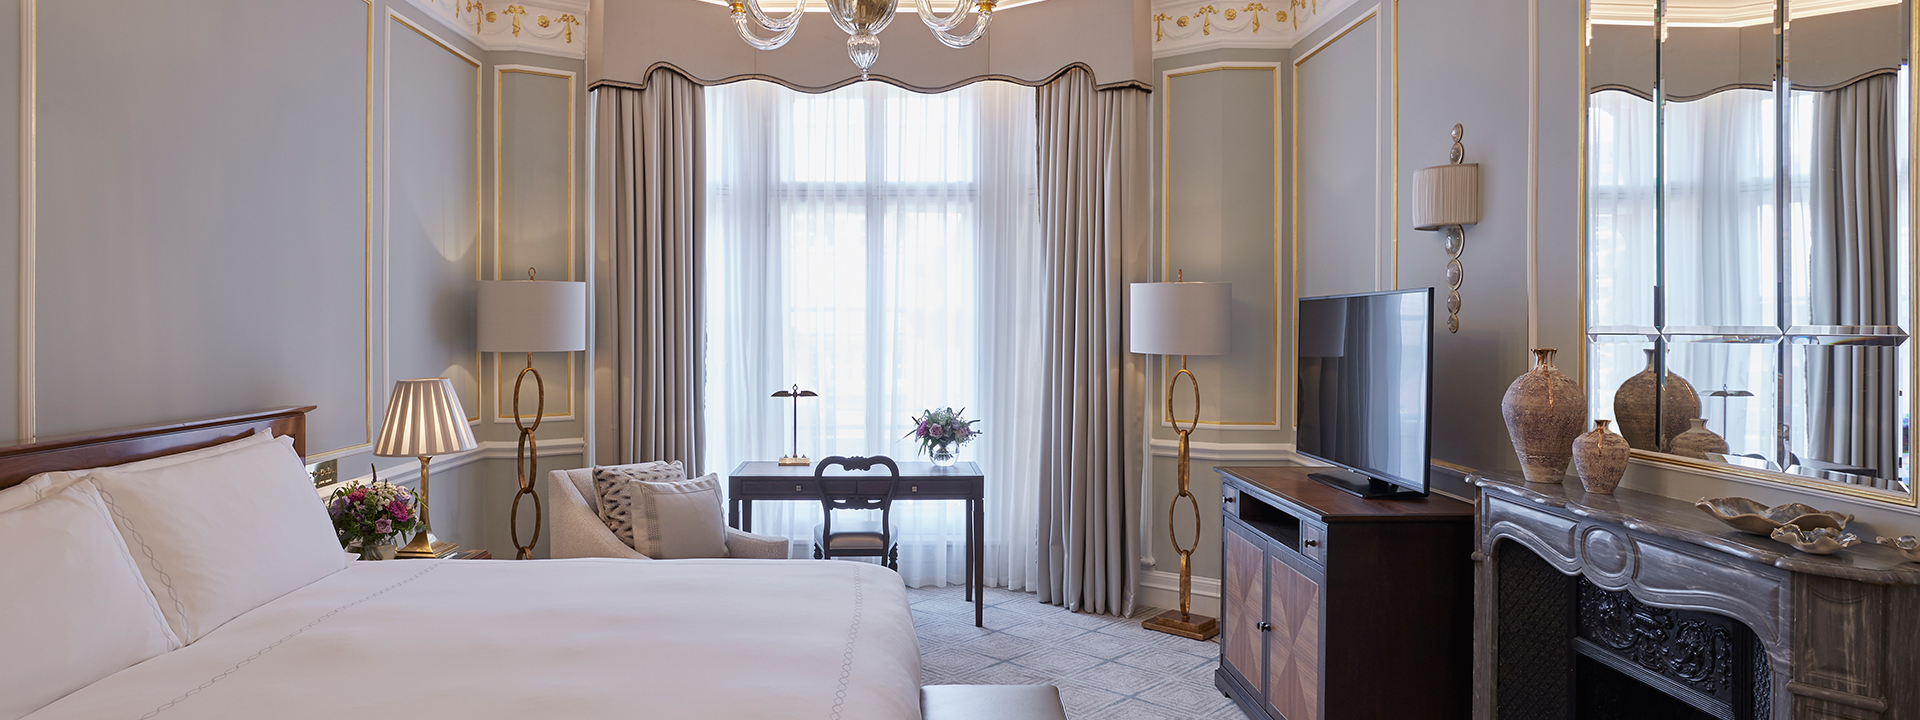 A comfortable bed and large TV in the bedroom from Claridge's Room, with luxurious lamps and vases in neutral colours.